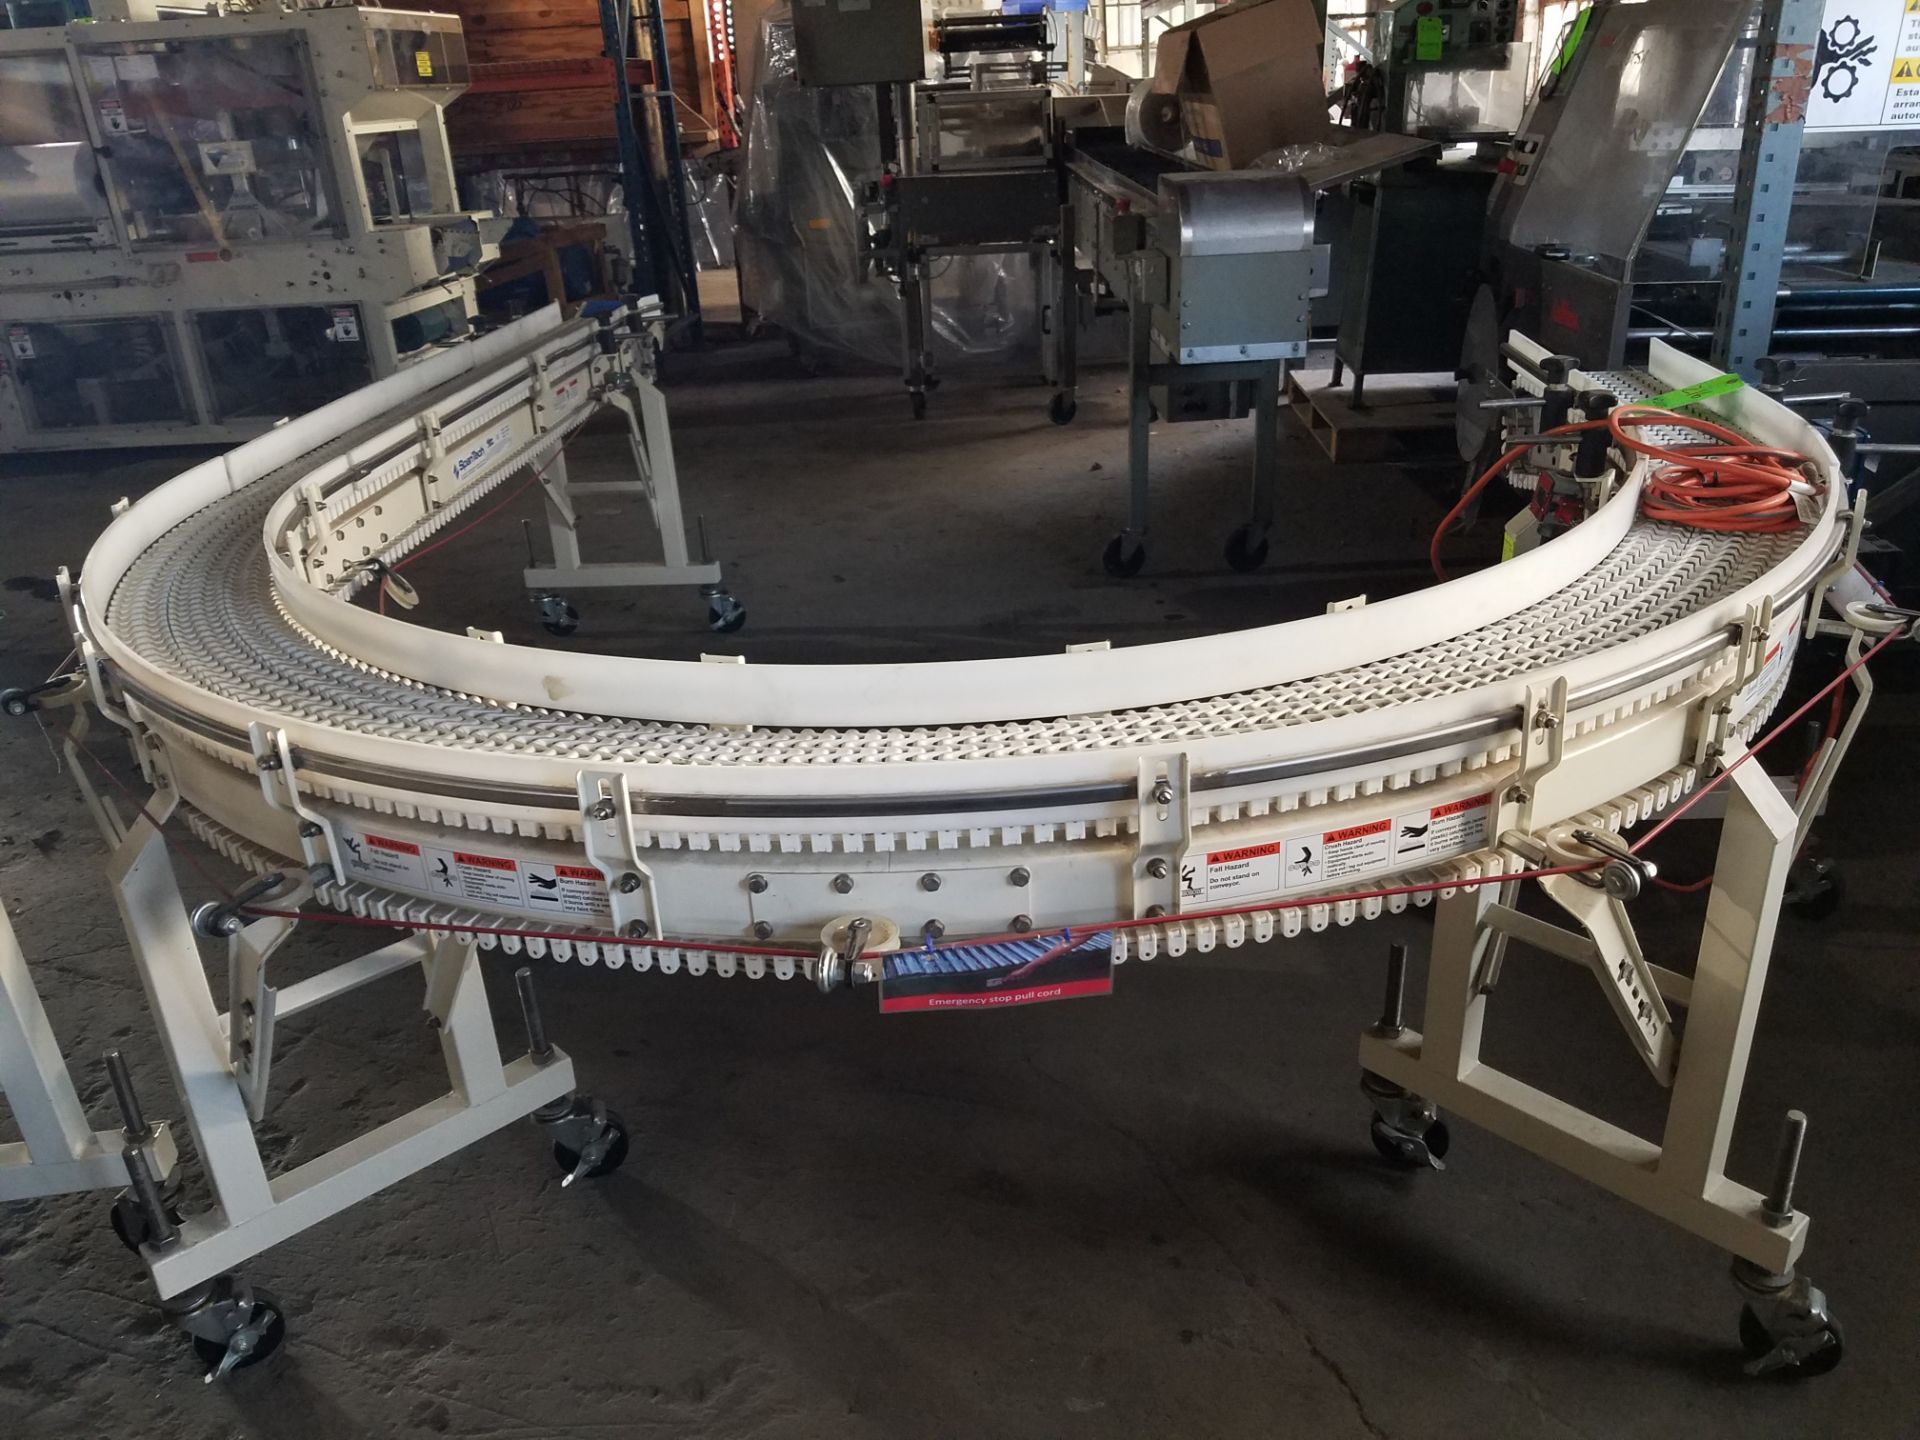 Spantech 8" W x 18' Long Plastic Conveyor with Speed Controls, Casters, Side Rails, Volt 110 - Image 2 of 4